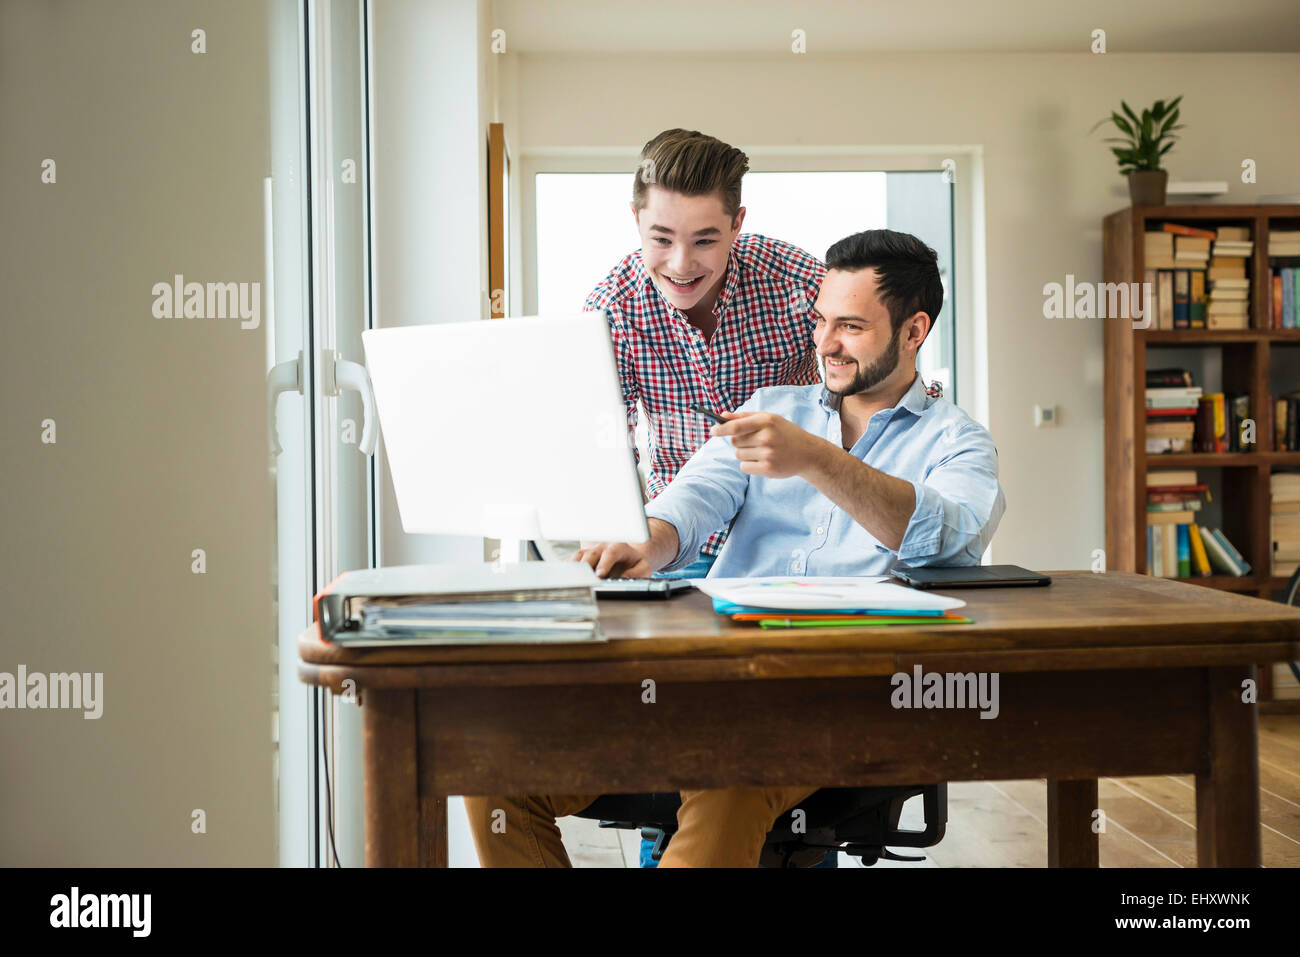 Two smiling young men looking at computer monitor Stock Photo